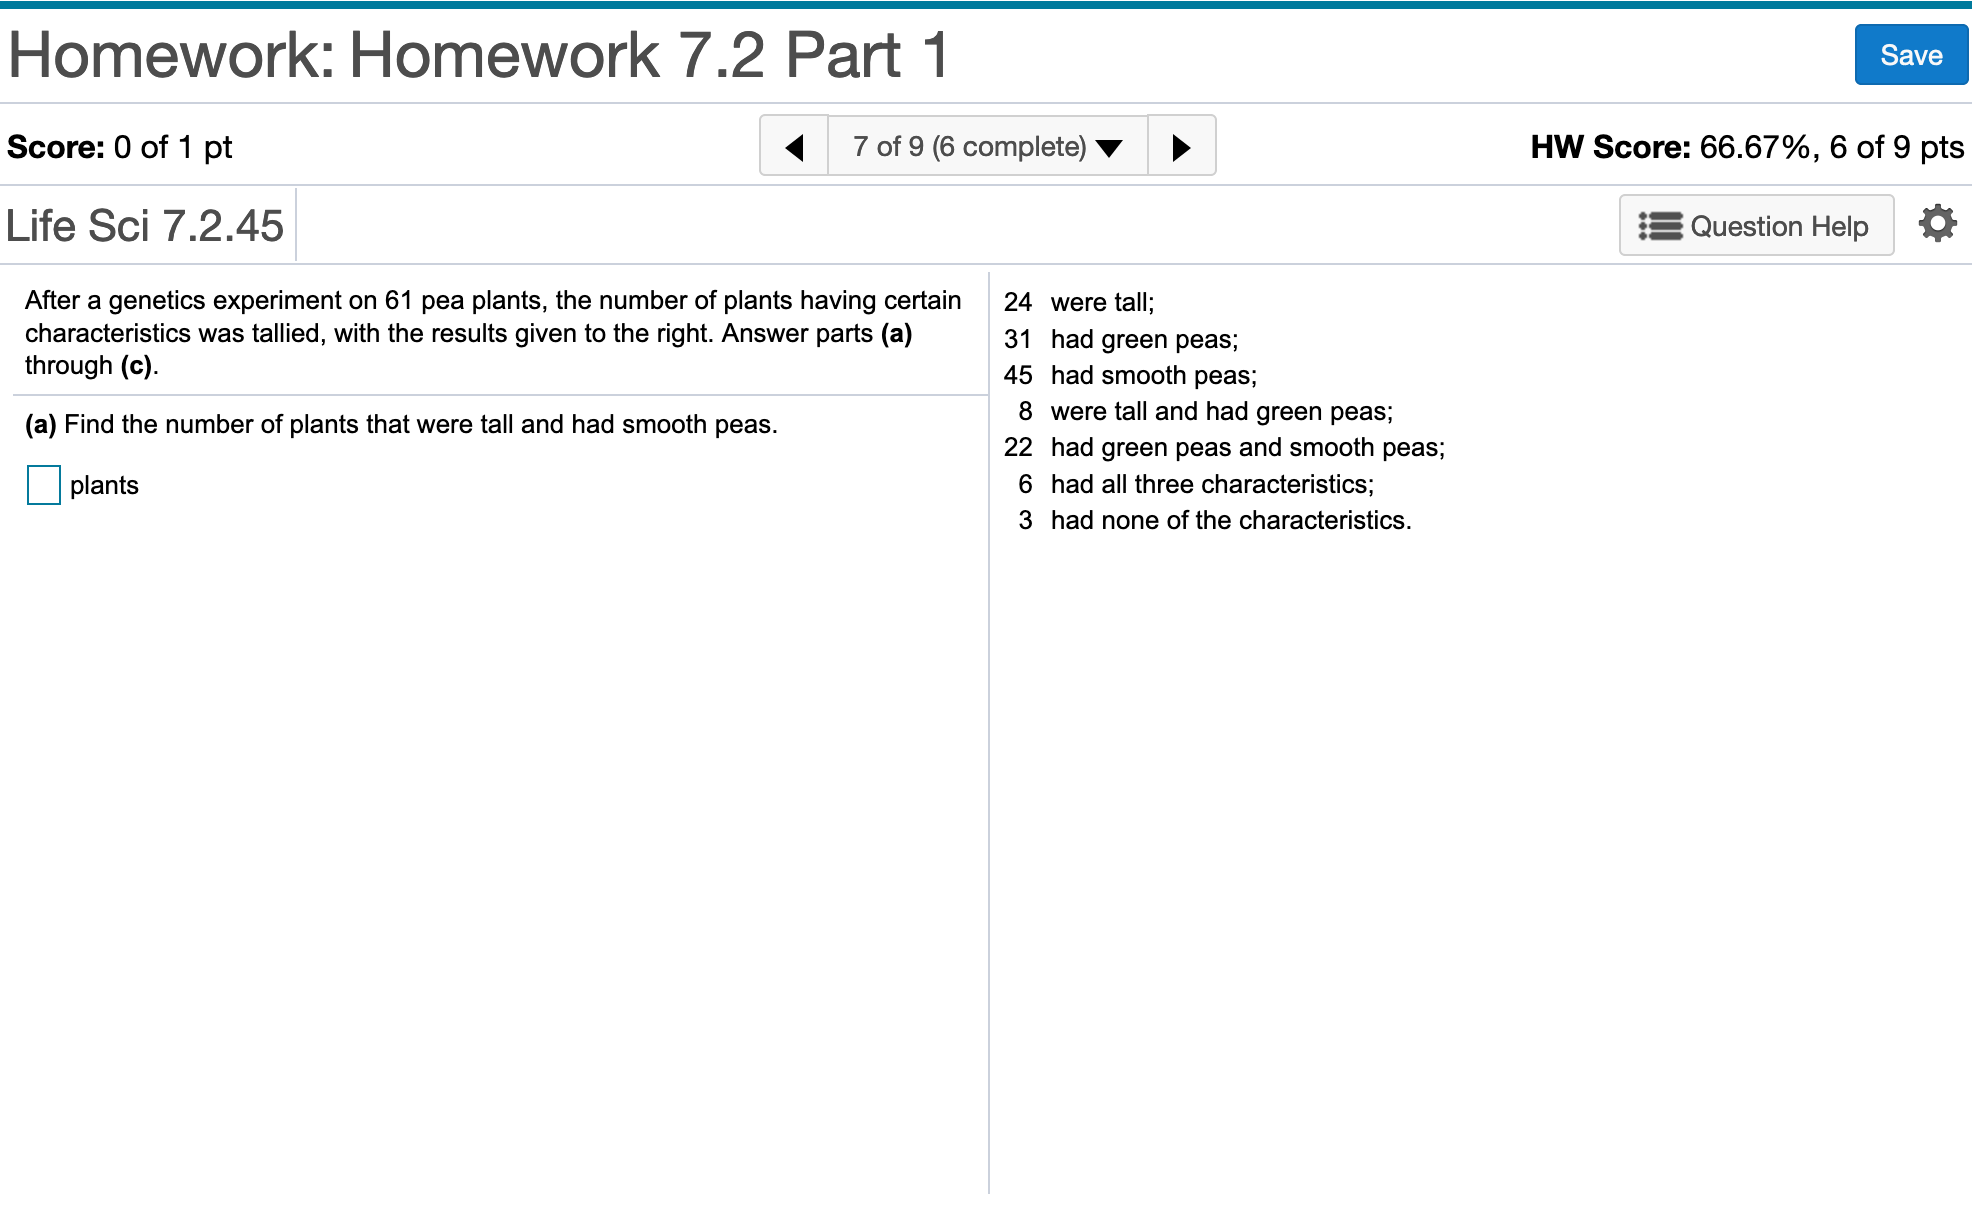 Homework: Homework 7.2 Part 1
Save
7 of 9 (6 complete)
HW Score: 66.67%, 6 of 9 pts
Score: 0 of 1 pt
Life Sci 7.2.45
Question Help
After a genetics experiment on 61 pea plants, the number of plants having certain
characteristics was tallied, with the results given to the right. Answer parts (a)
through (c).
24 were tall;
31 had green peas;
45 had smooth peas;
8 were tall and had green peas;
(a) Find the number of plants that were tall and had smooth peas.
22 had green peas and smooth peas;
6 had all three characteristics;
plants
3 had none of the characteristics.
